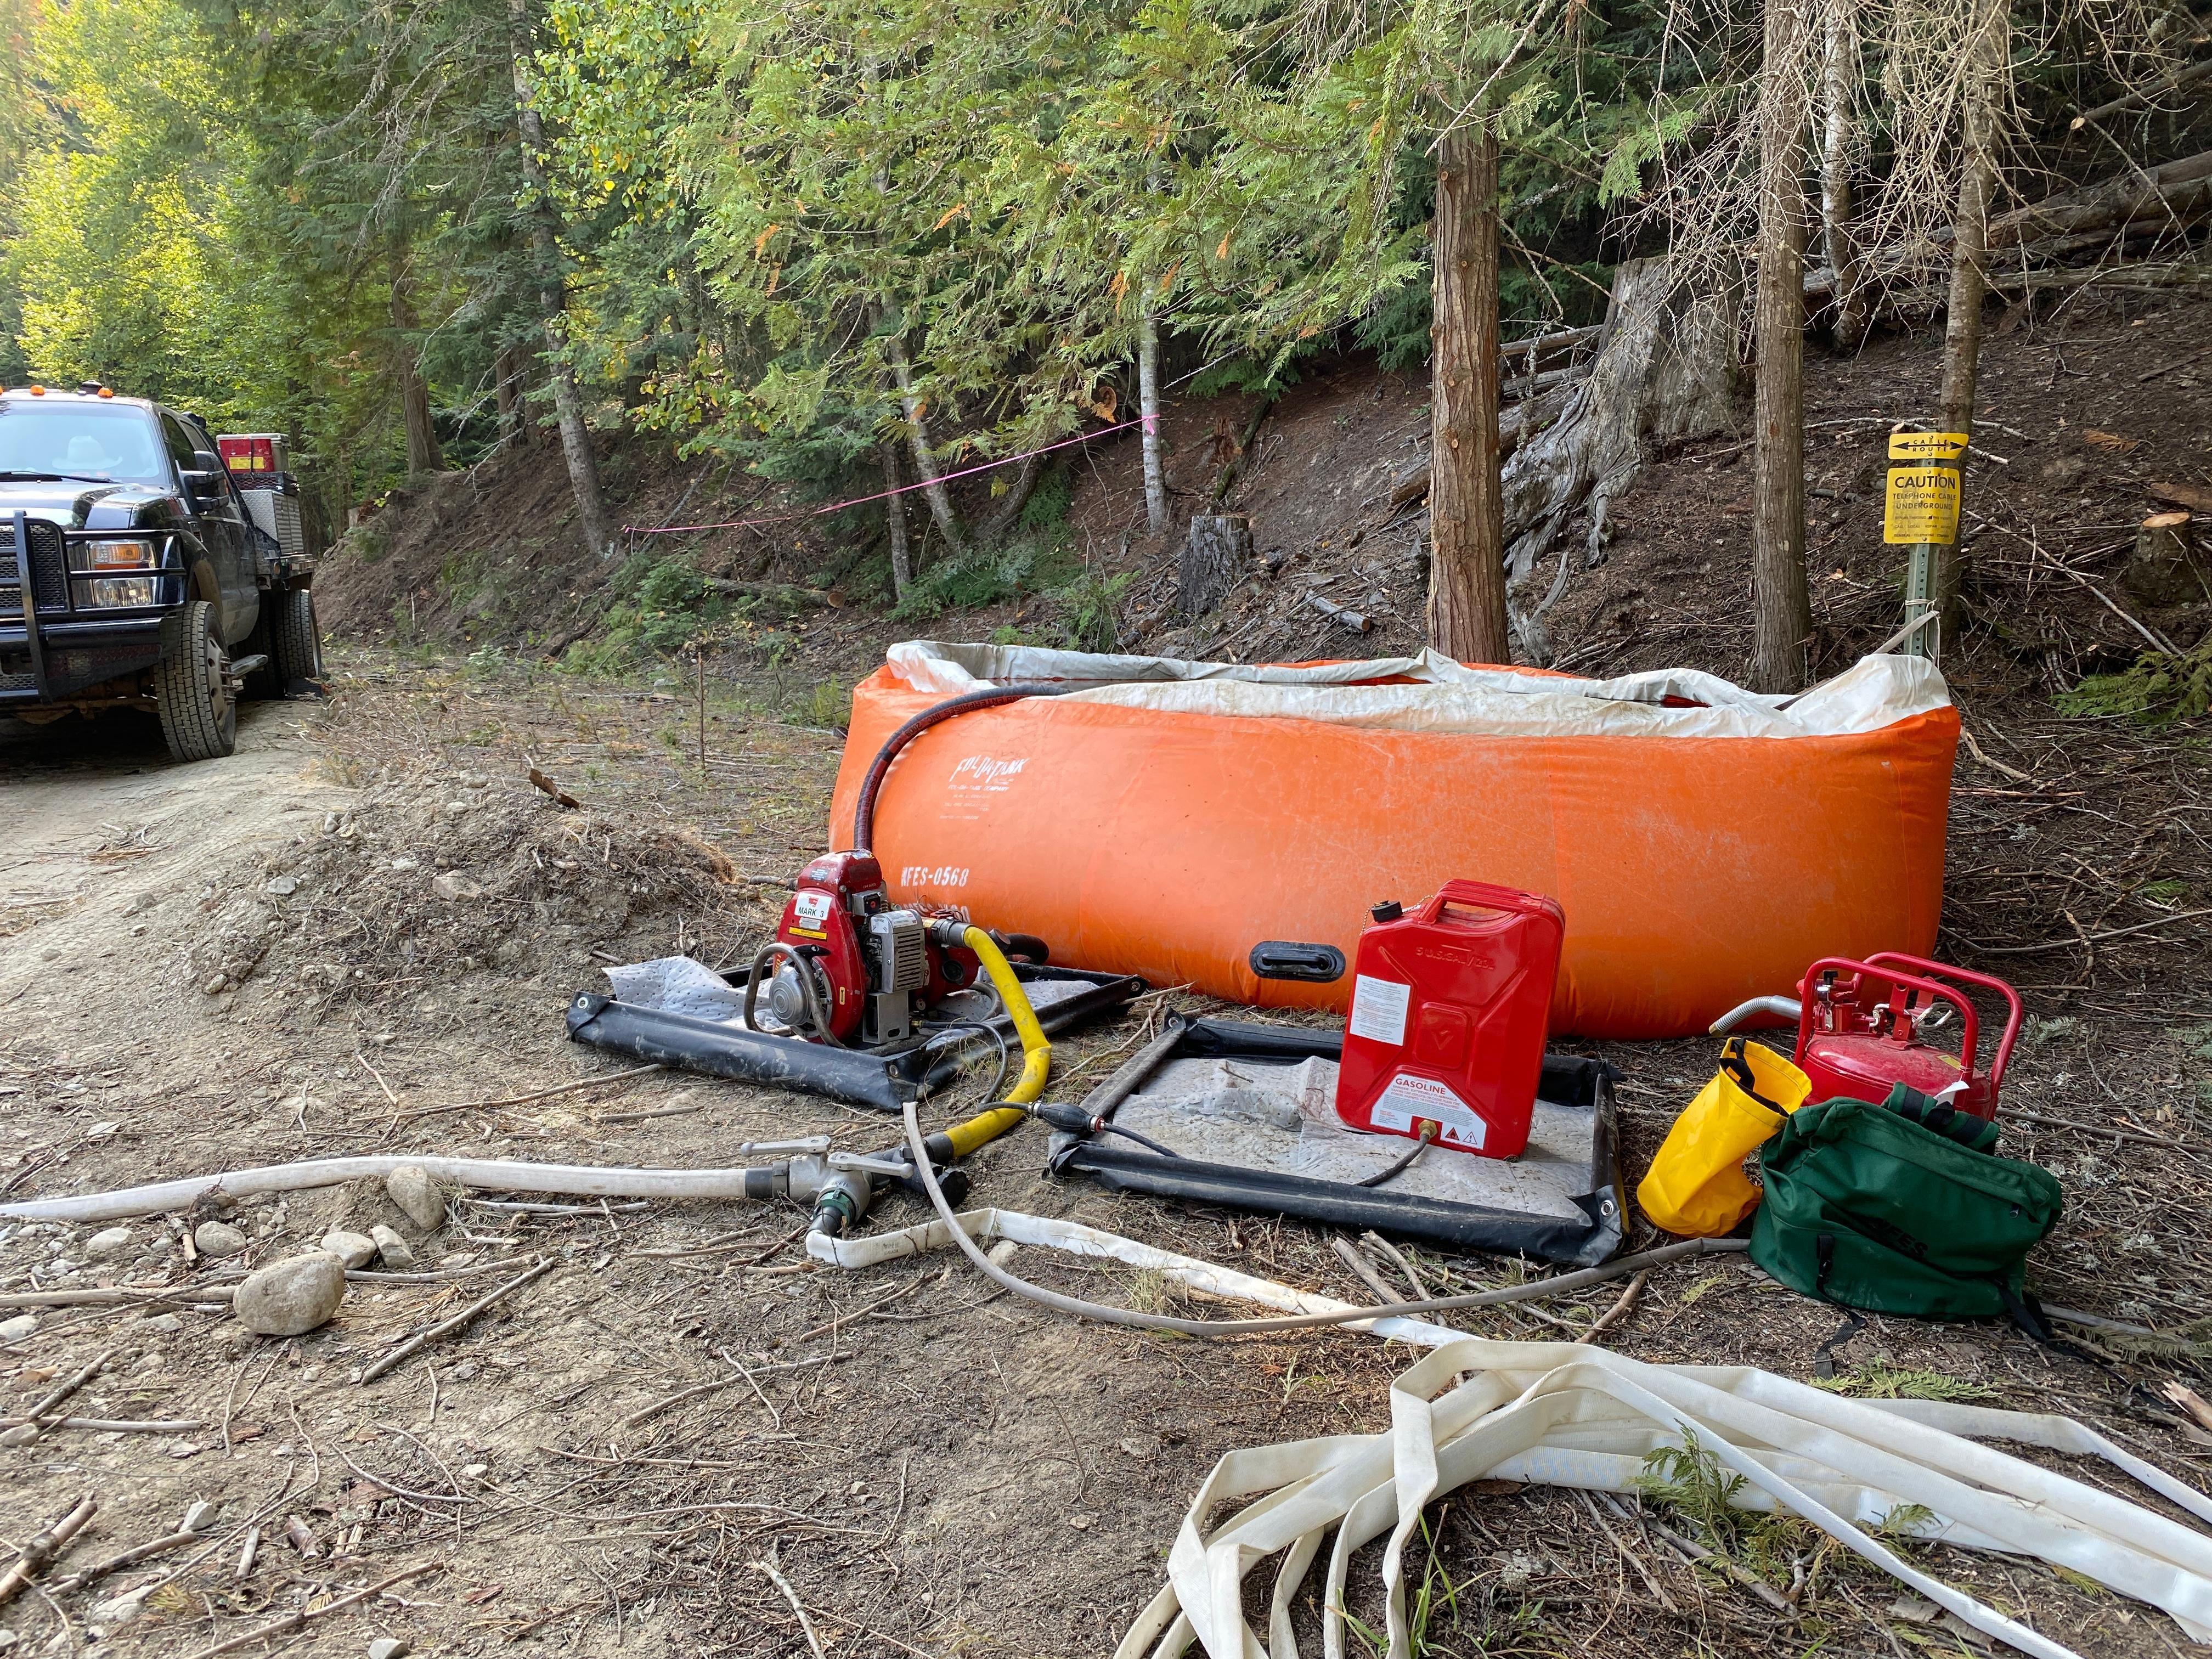 Portable water and pump for structure protection. Fire engine in driveway next to a orange water container with pump and hose. 